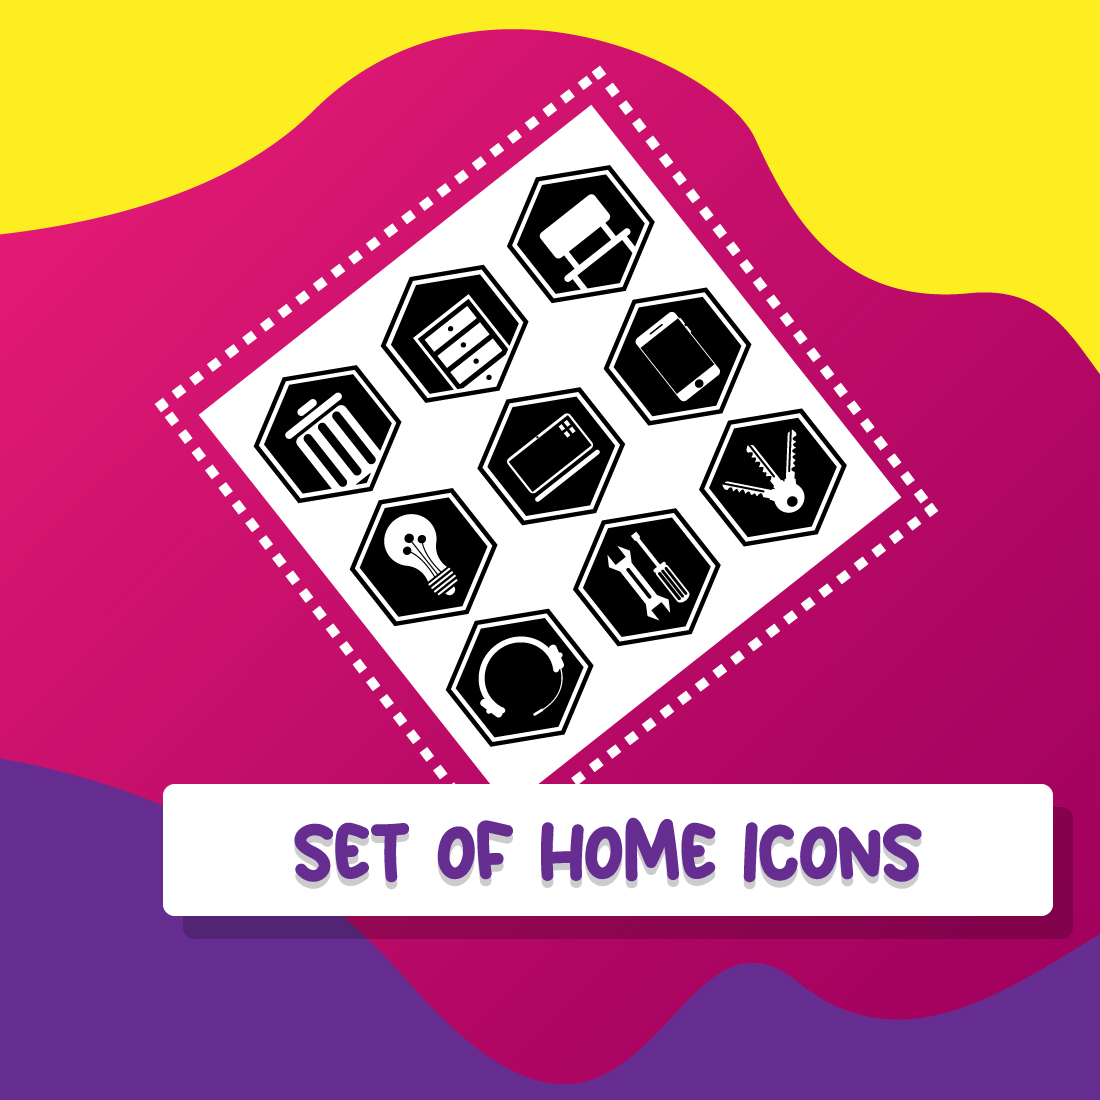 27 Vectors Home, Kitchen, and Fruit Hexagon Icons.